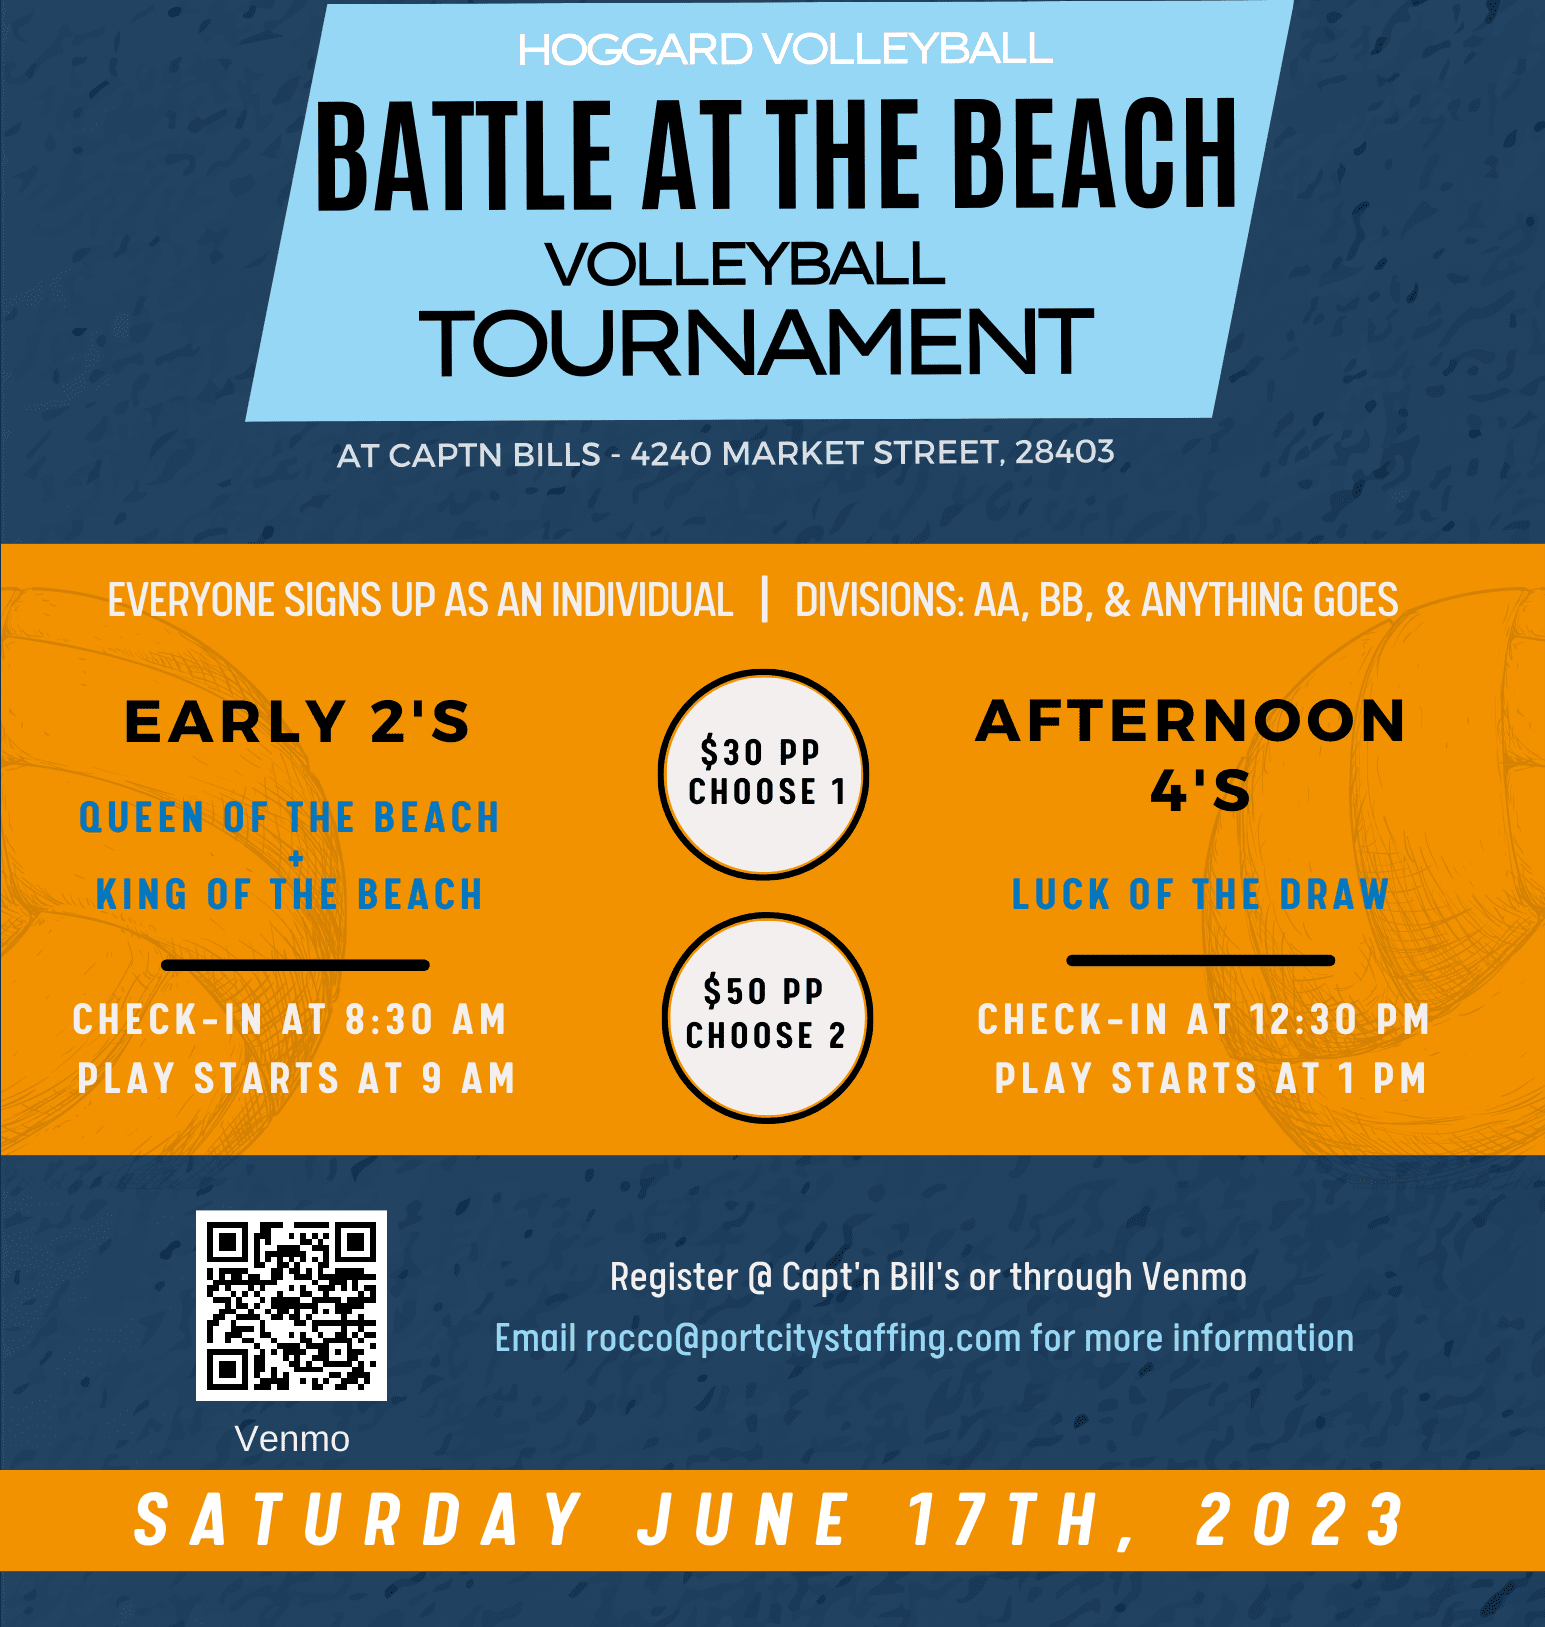 Battle at the Beach - See You at Bill's